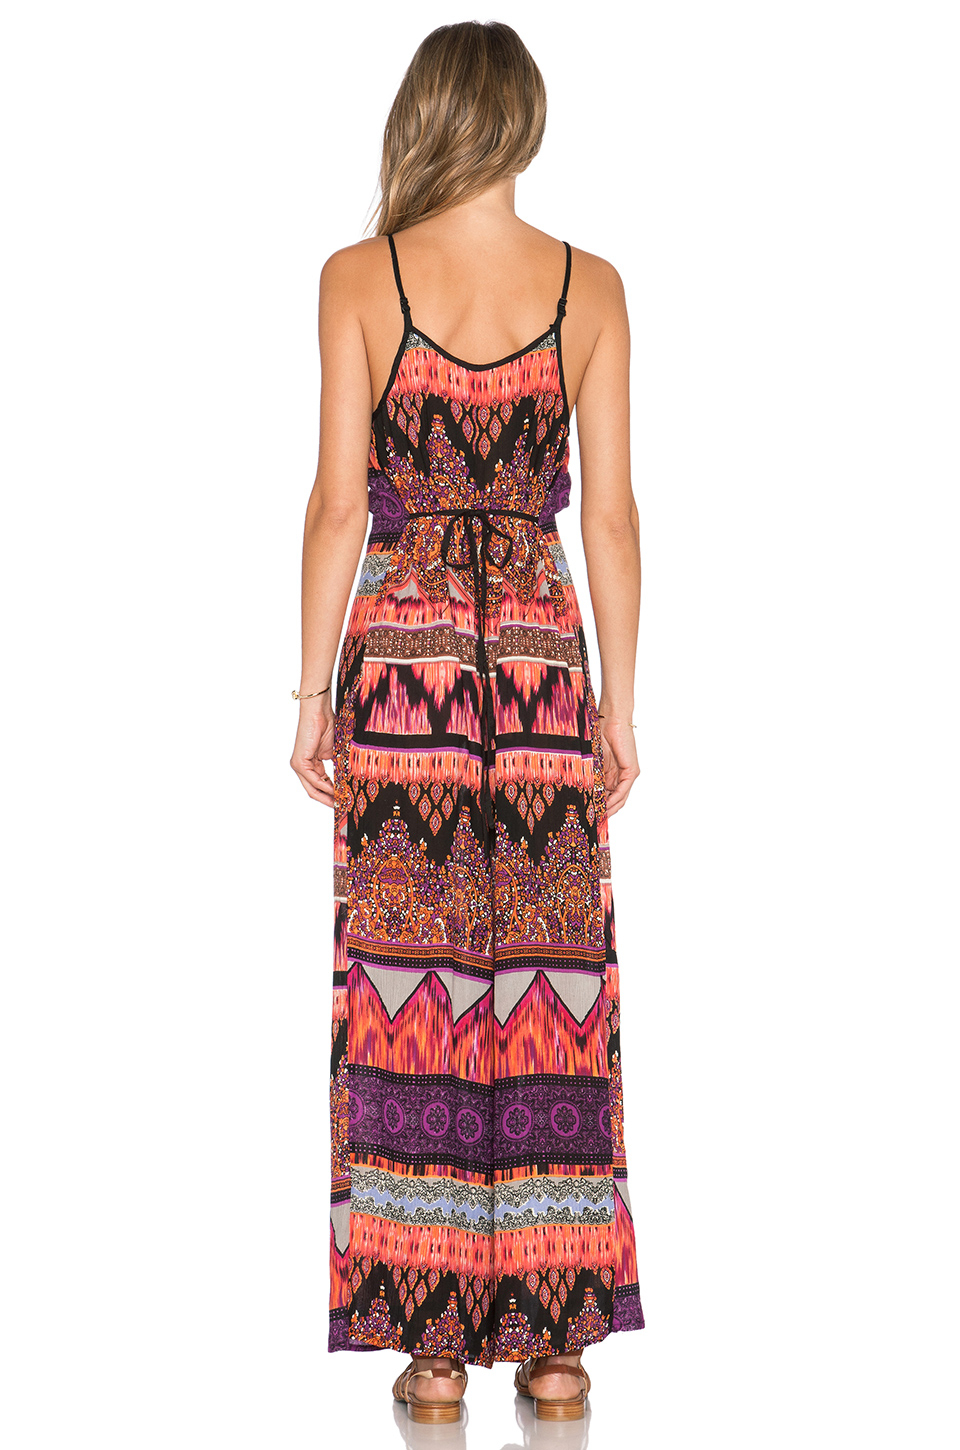 Lyst - Band Of Gypsies Jumpsuit in Pink